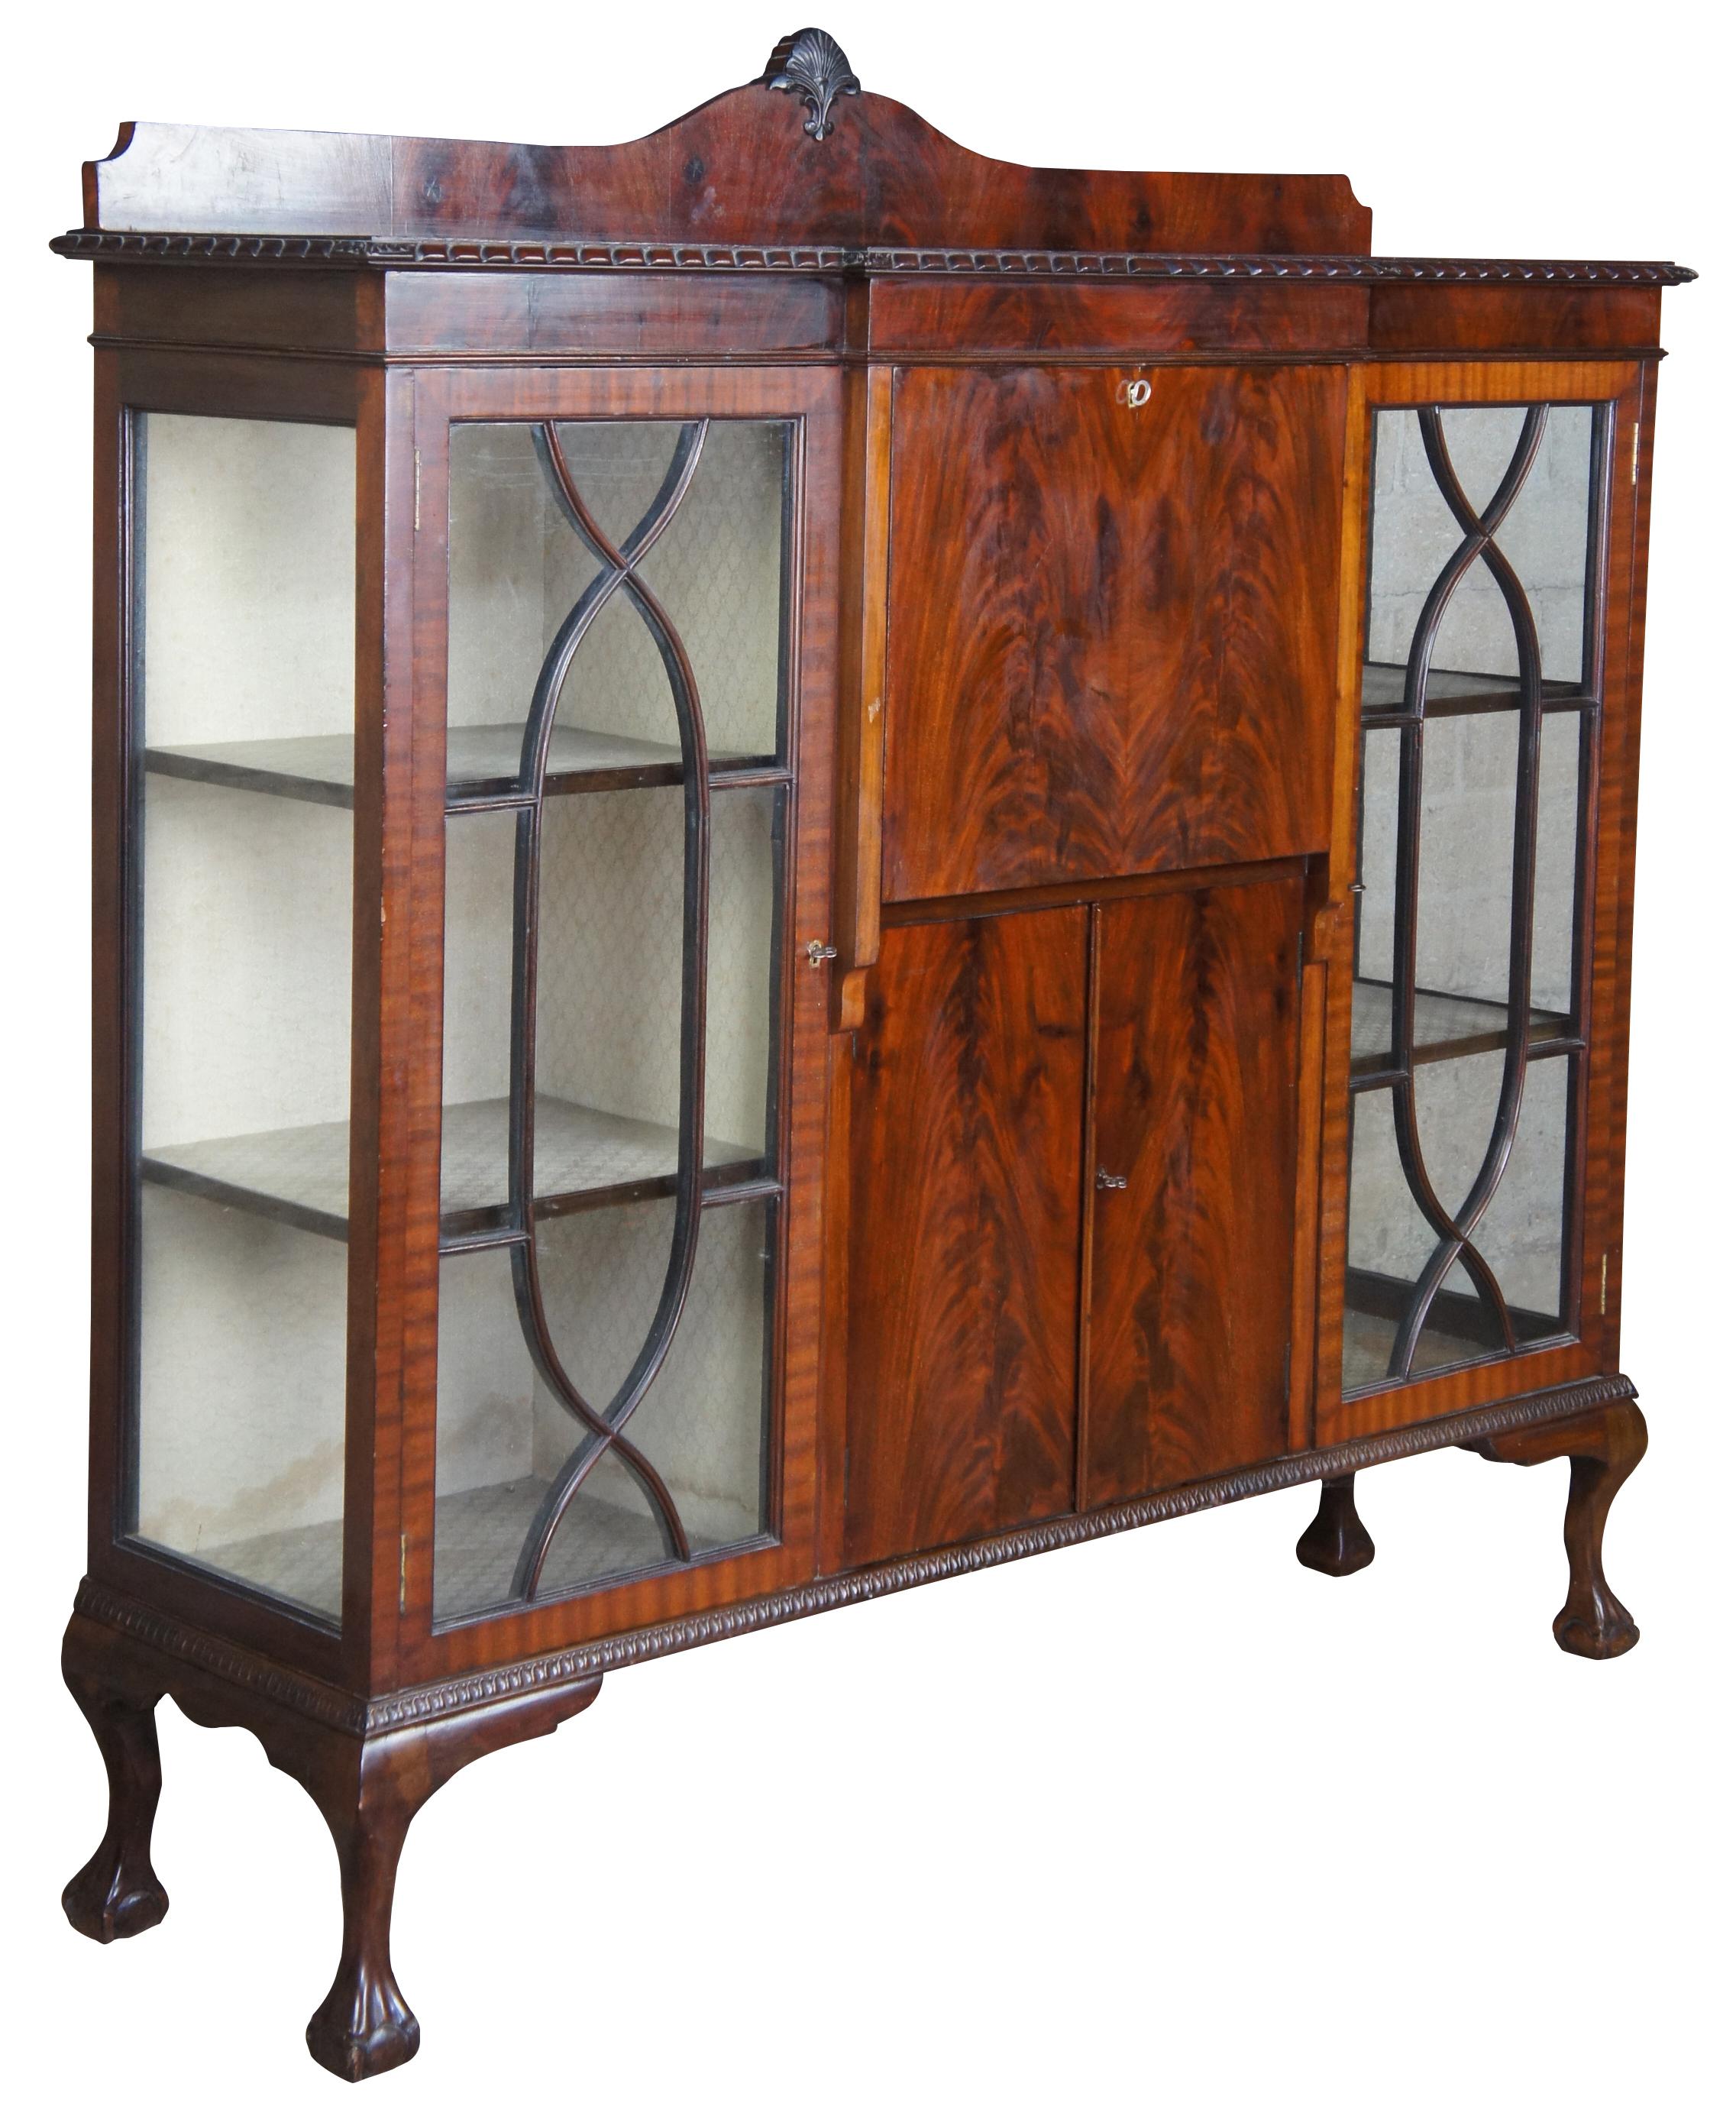 Exquisite 19th century Chippendale style side by side secretary. A rectangular case with breakfront design made from crotch mahogany with carved backsplash. Features a drop front writing desk flanked by bookcases. The petite secretary opens to a